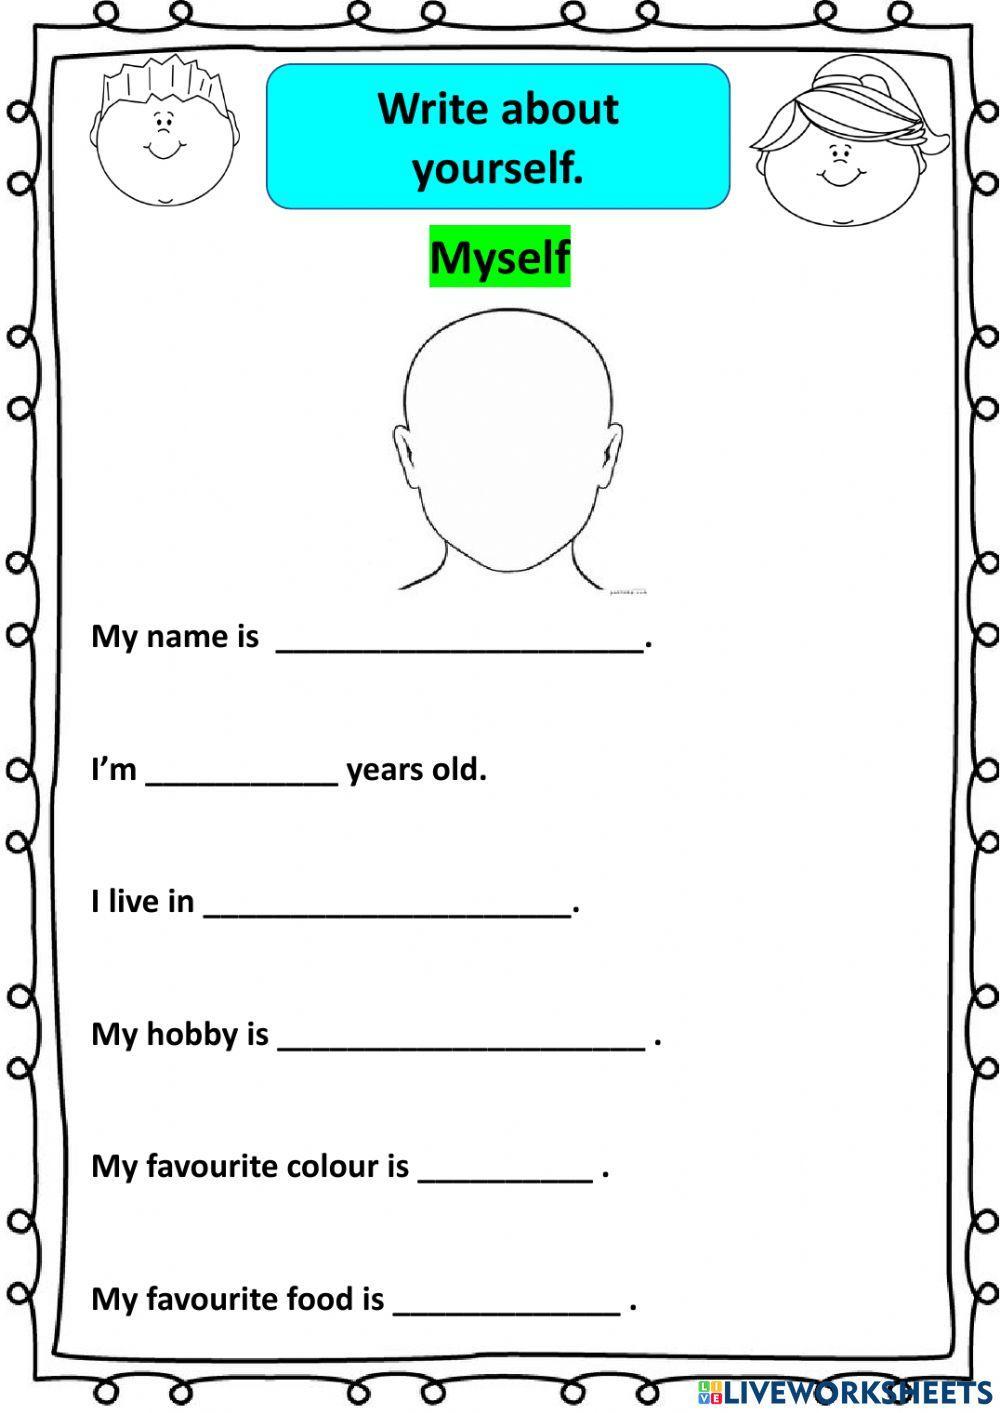 English Year 2 Lesson 1 (Write about your self)